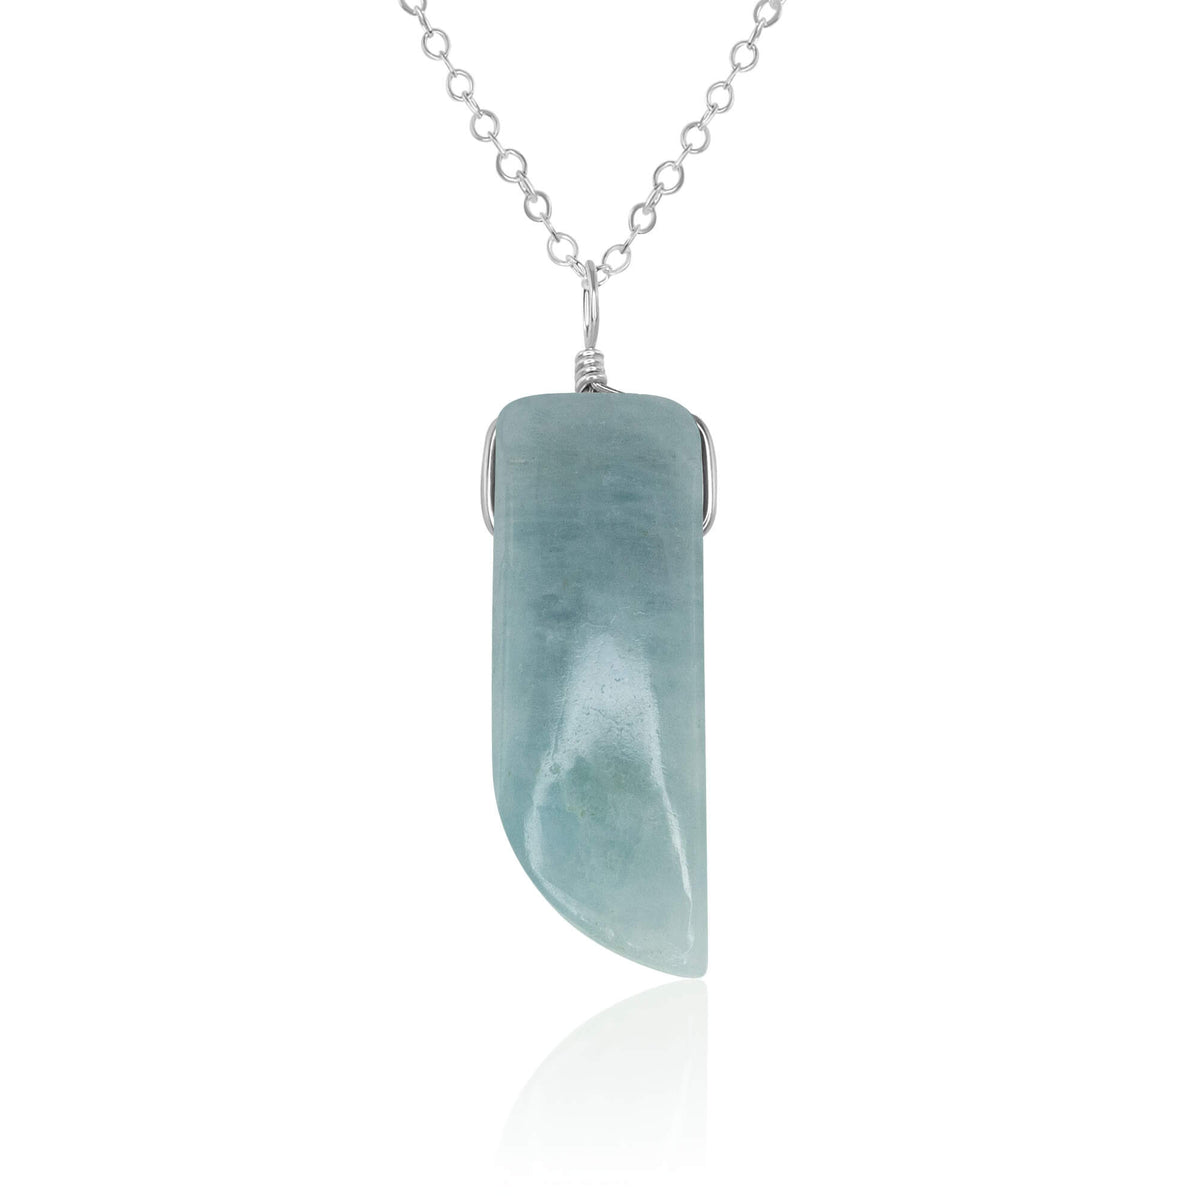 Smooth Point Pendant Necklace - Aquamarine - Sterling Silver - Luna Tide Handmade Jewellery